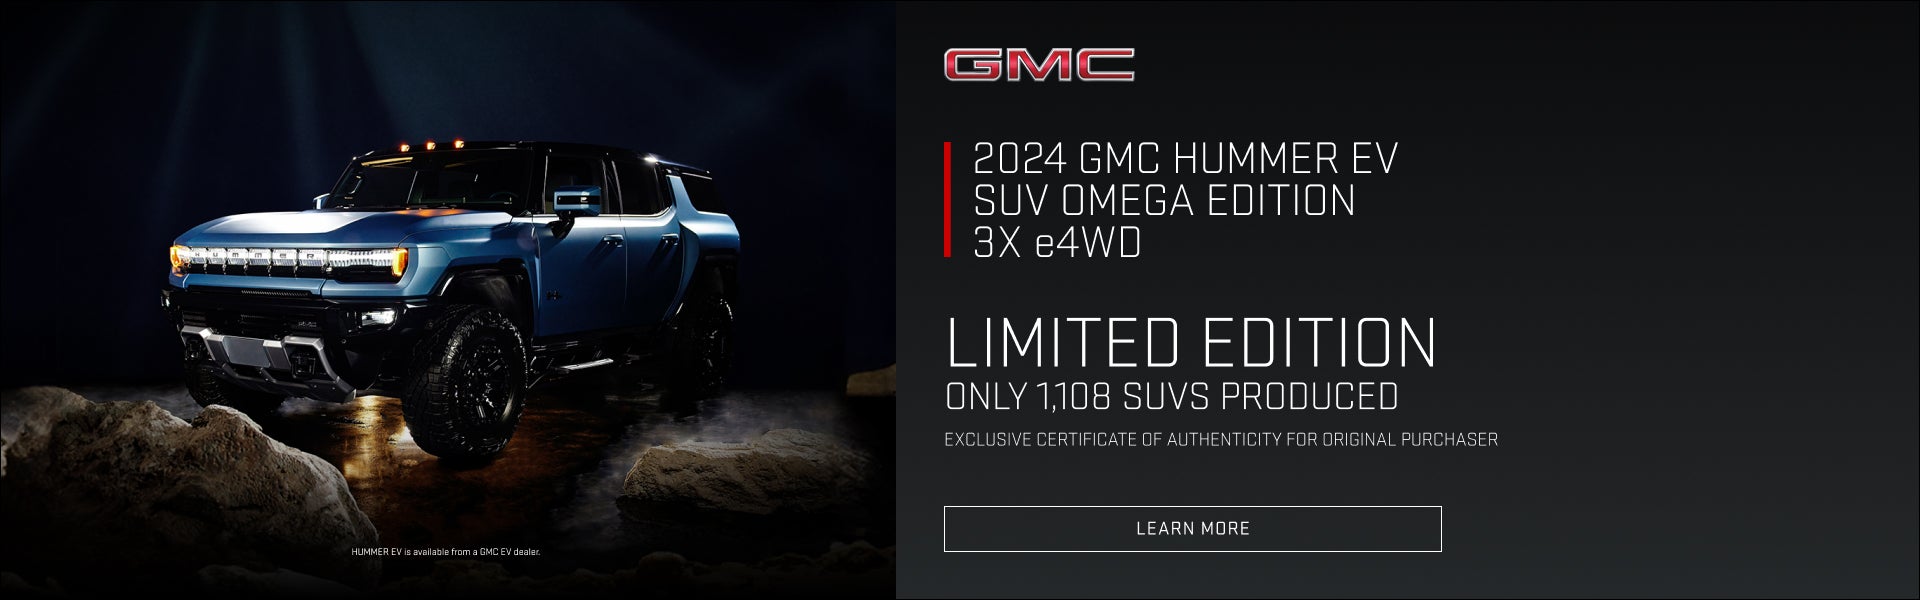 LIMITED EDITION

LIMITED TO 1,108 PICKUPS PRODUCED

EXCLUSIVE CERTIFICATE OF AUTHENTICITY FOR ORI...